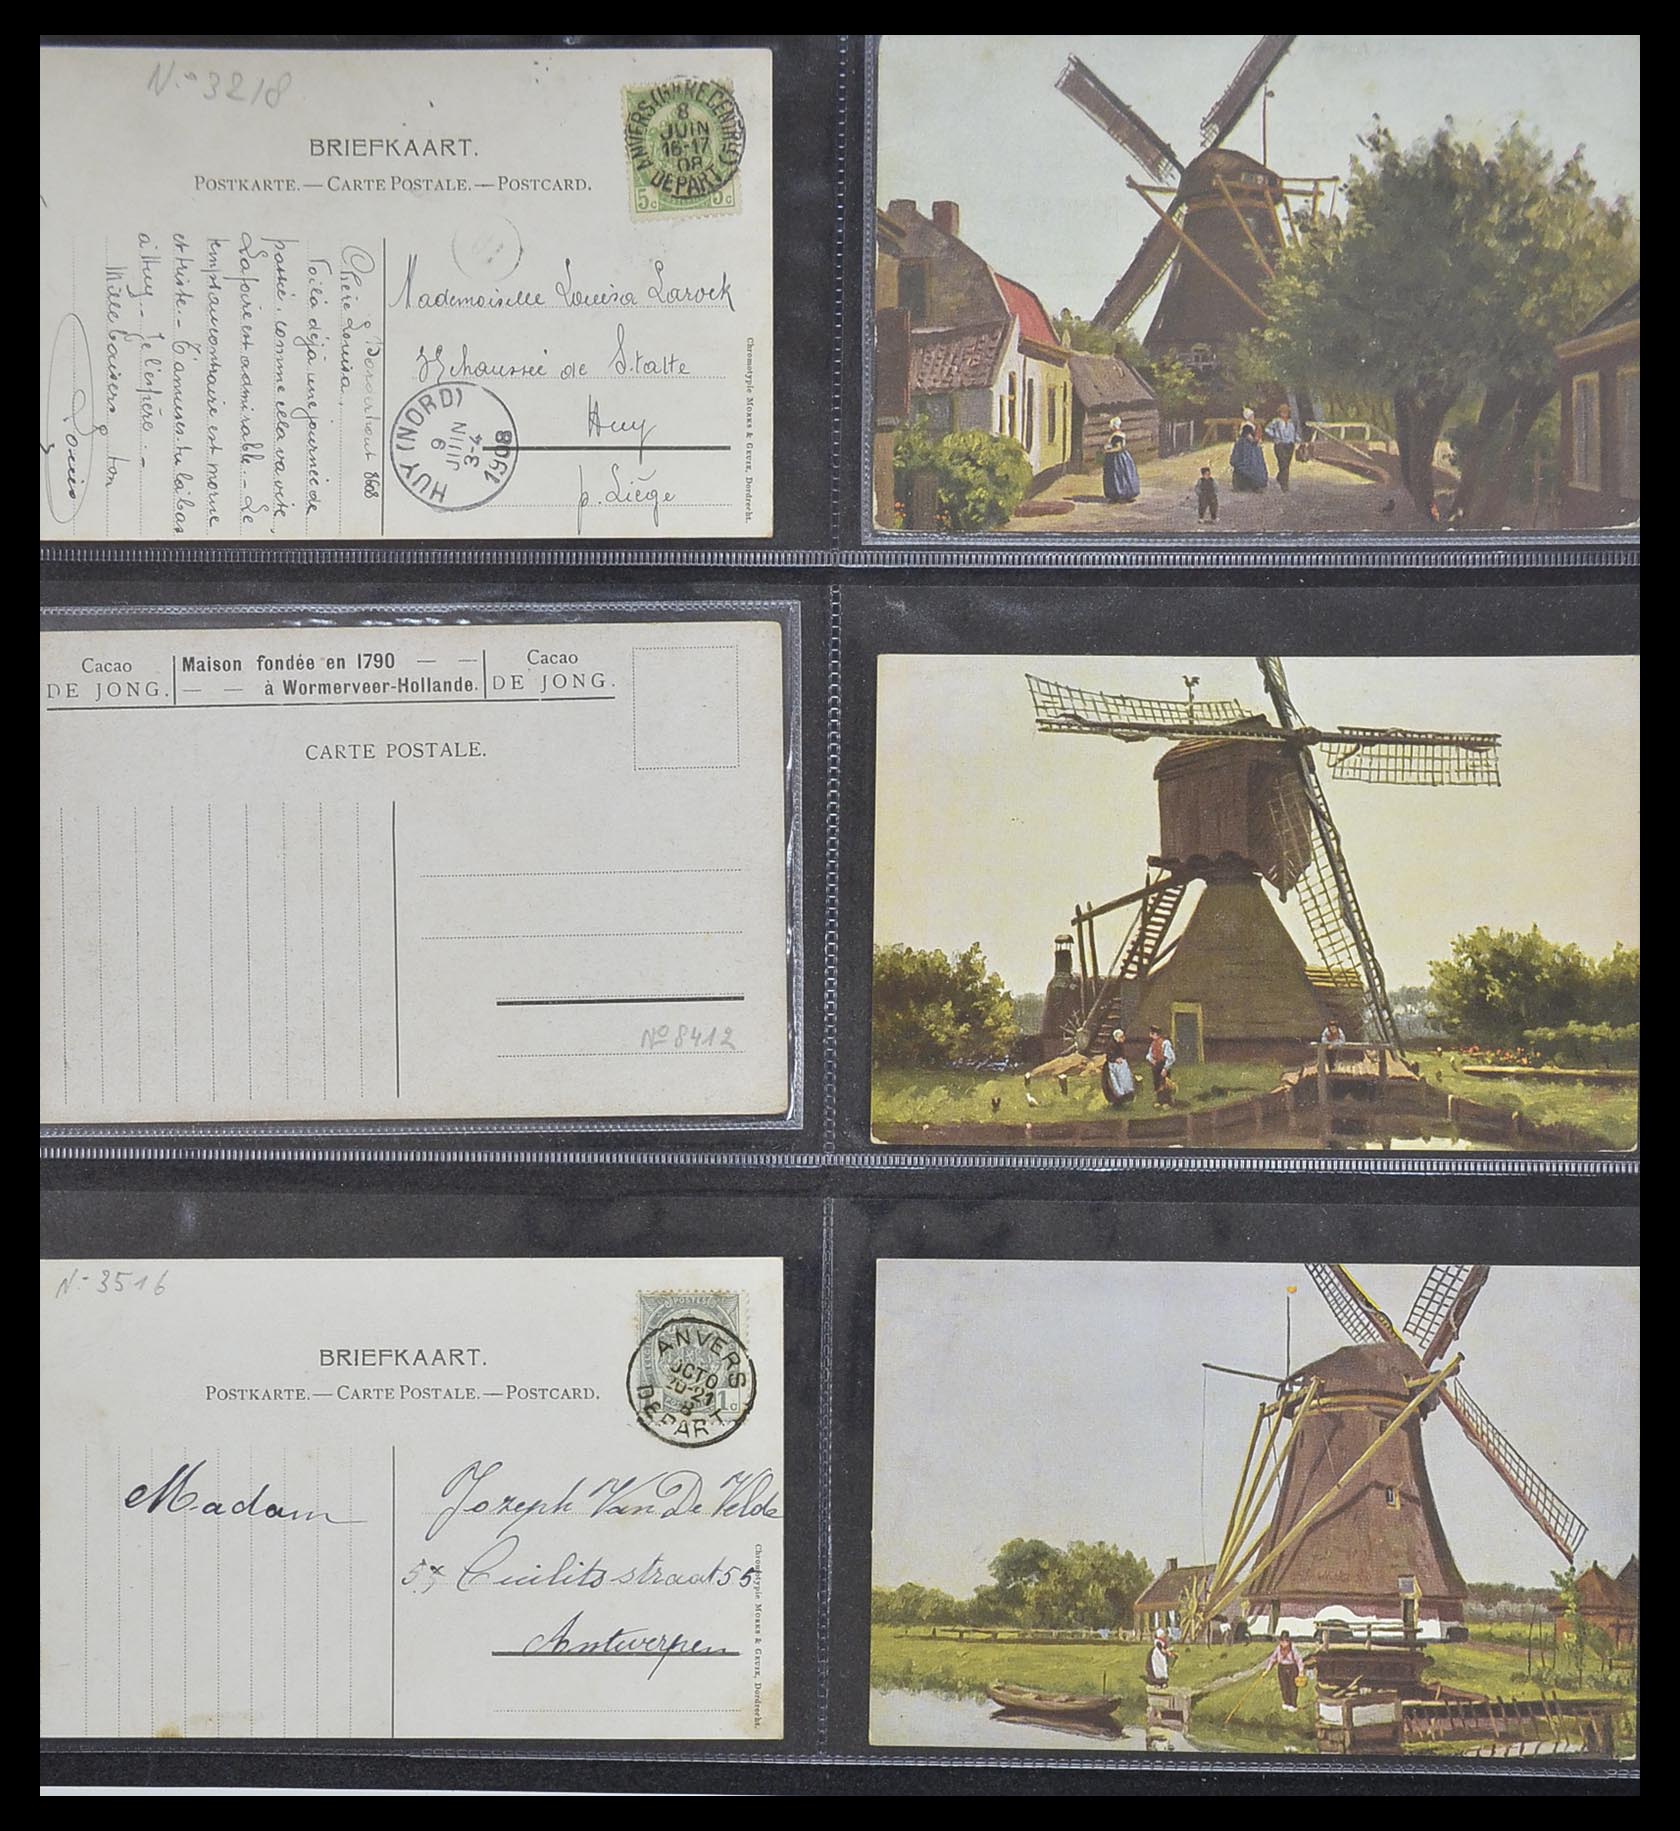 33928 182 - Stamp collection 33928 Netherlands picture postcards 1910-1930.